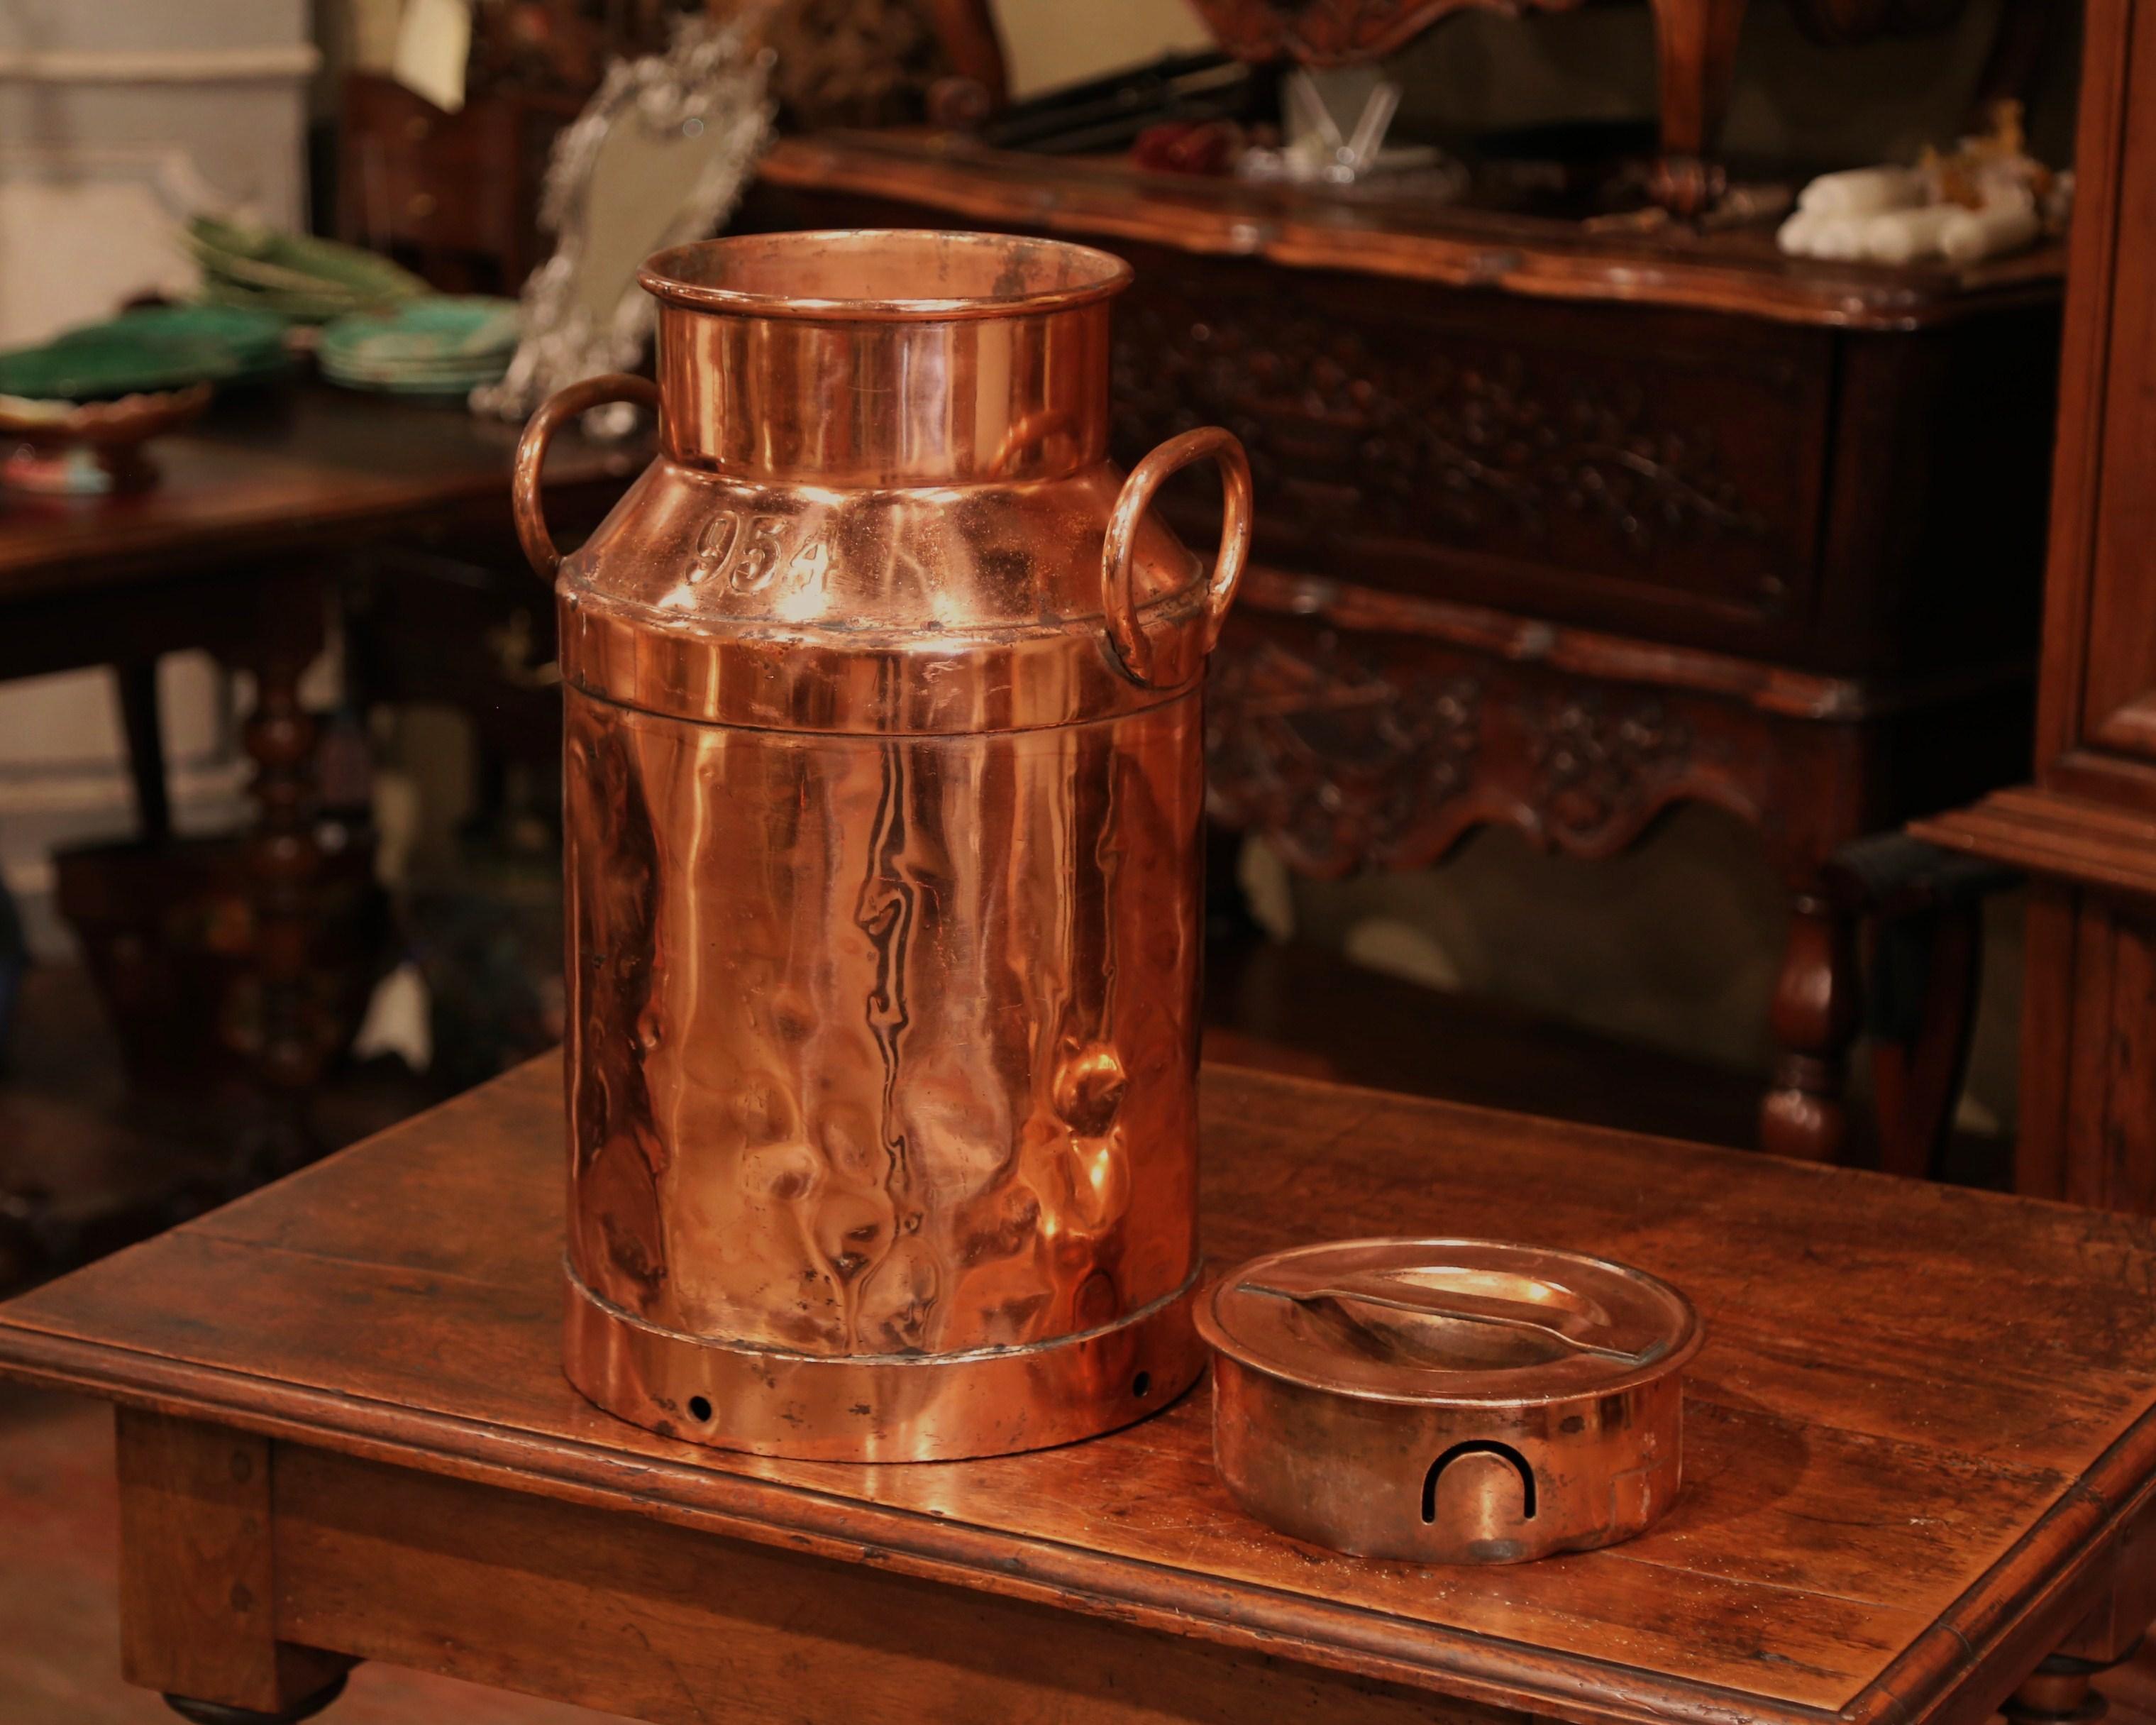 Hand-Crafted 19th Century French Polished Copper Plated Milk Container with Handles and Lid